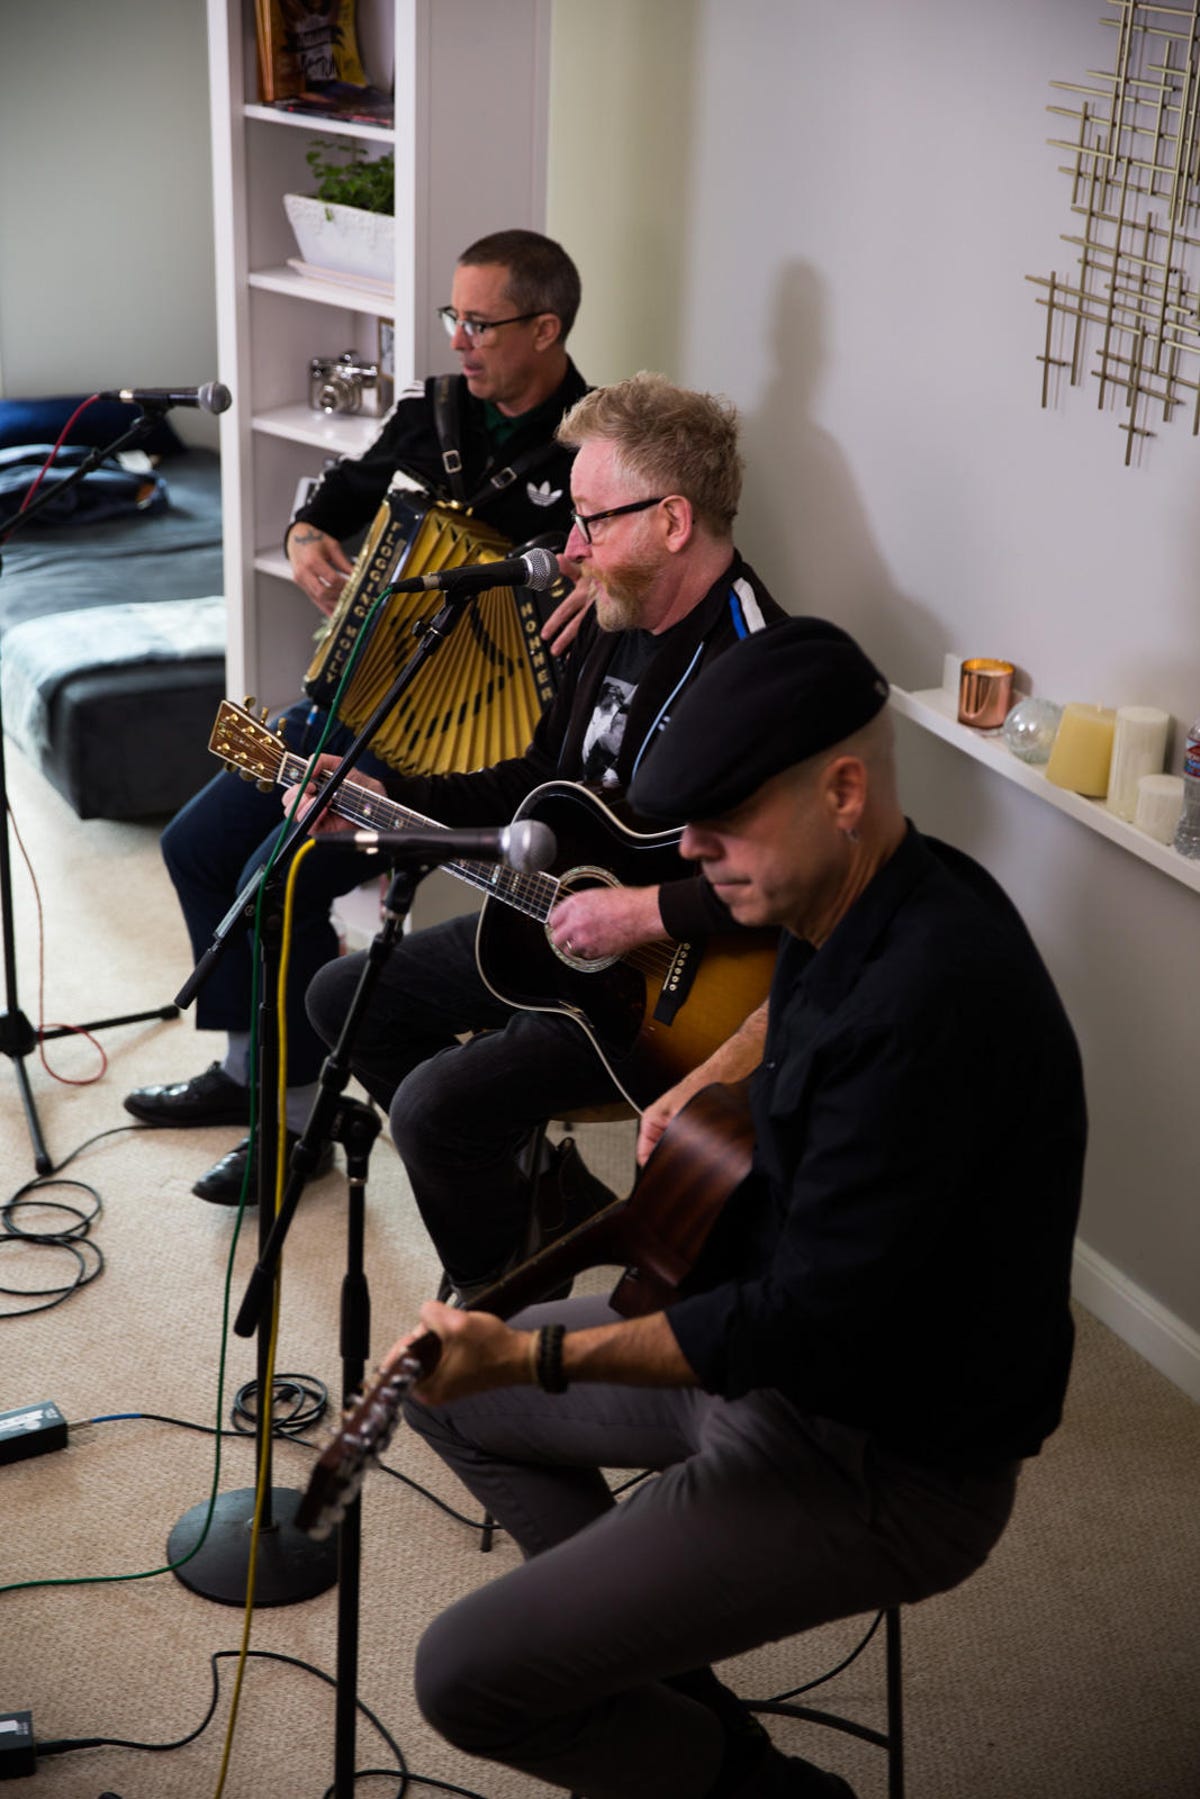 flogging-molly-cnet-smart-home-sessions-8511